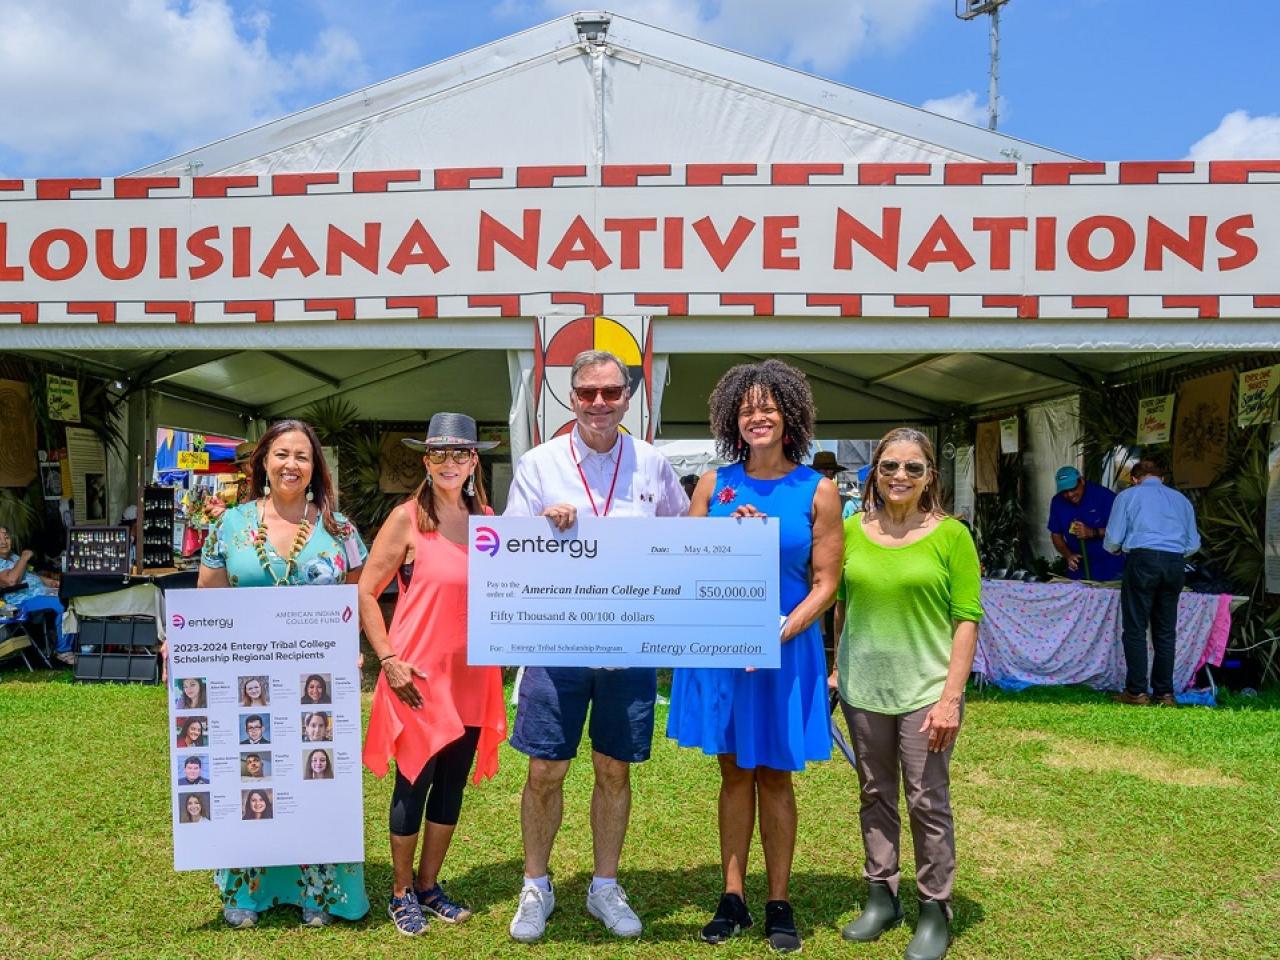 Five people posed with a large check and profiles of scholarship winners posed outside a booth "Louisiana Native Nations."